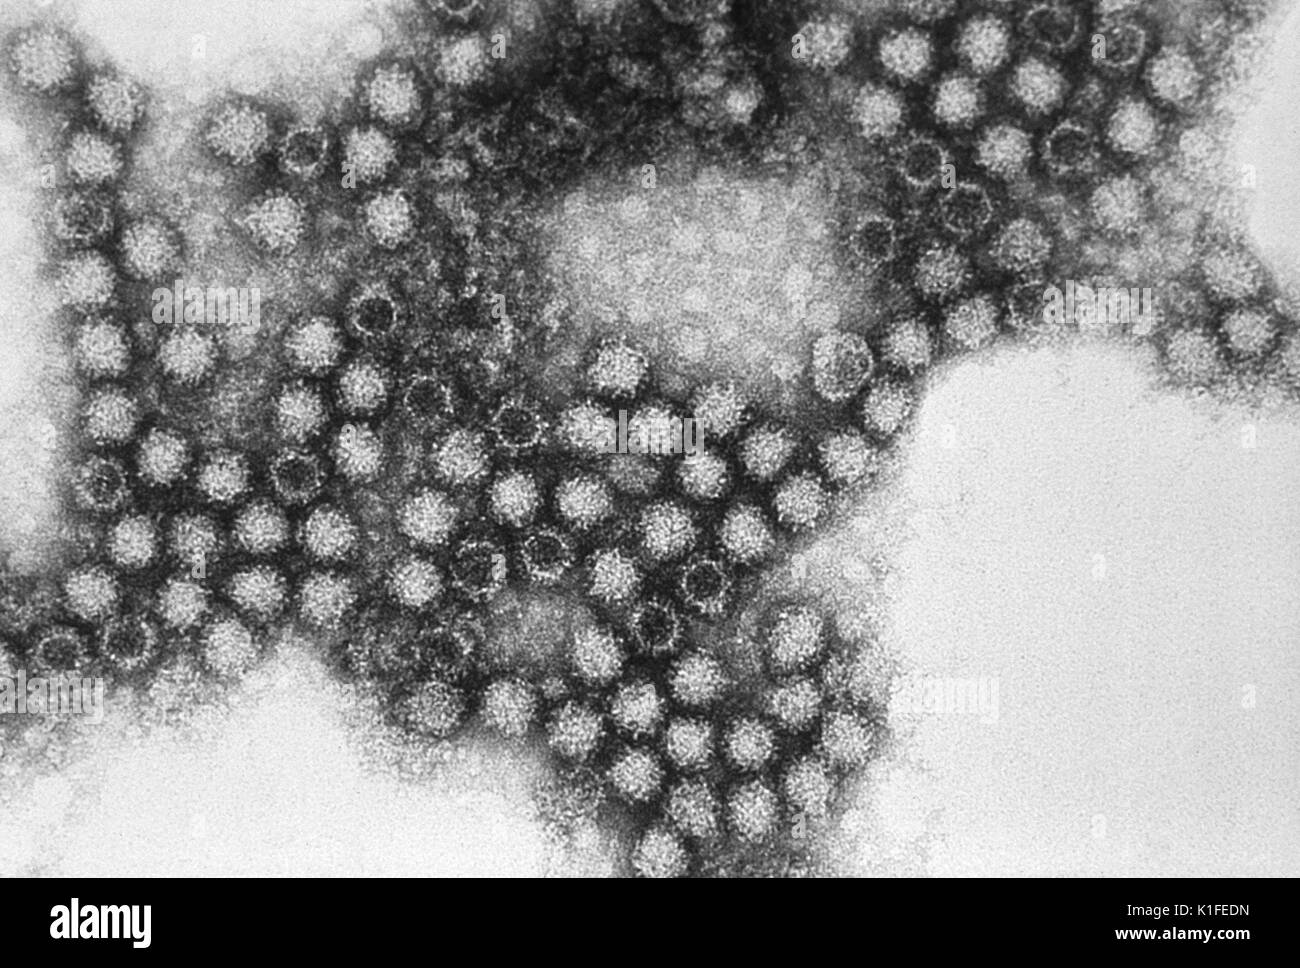 This electron micrograph reveals the morphologic traits exhibited by the feline calicivirus (FCV), a Caliciviridae family member, Feline calicivirus virions average 35nm - 40nm in diameter, and exhibit cup-like surface depressions, which sometimes manifest as a 'Star of David' array. The feline symptoms include upper respiratory symptoms with oral ulcerations, and pneumonitis. Image courtesy CDC/Dr. Erskine Palmer., 1981. Stock Photo